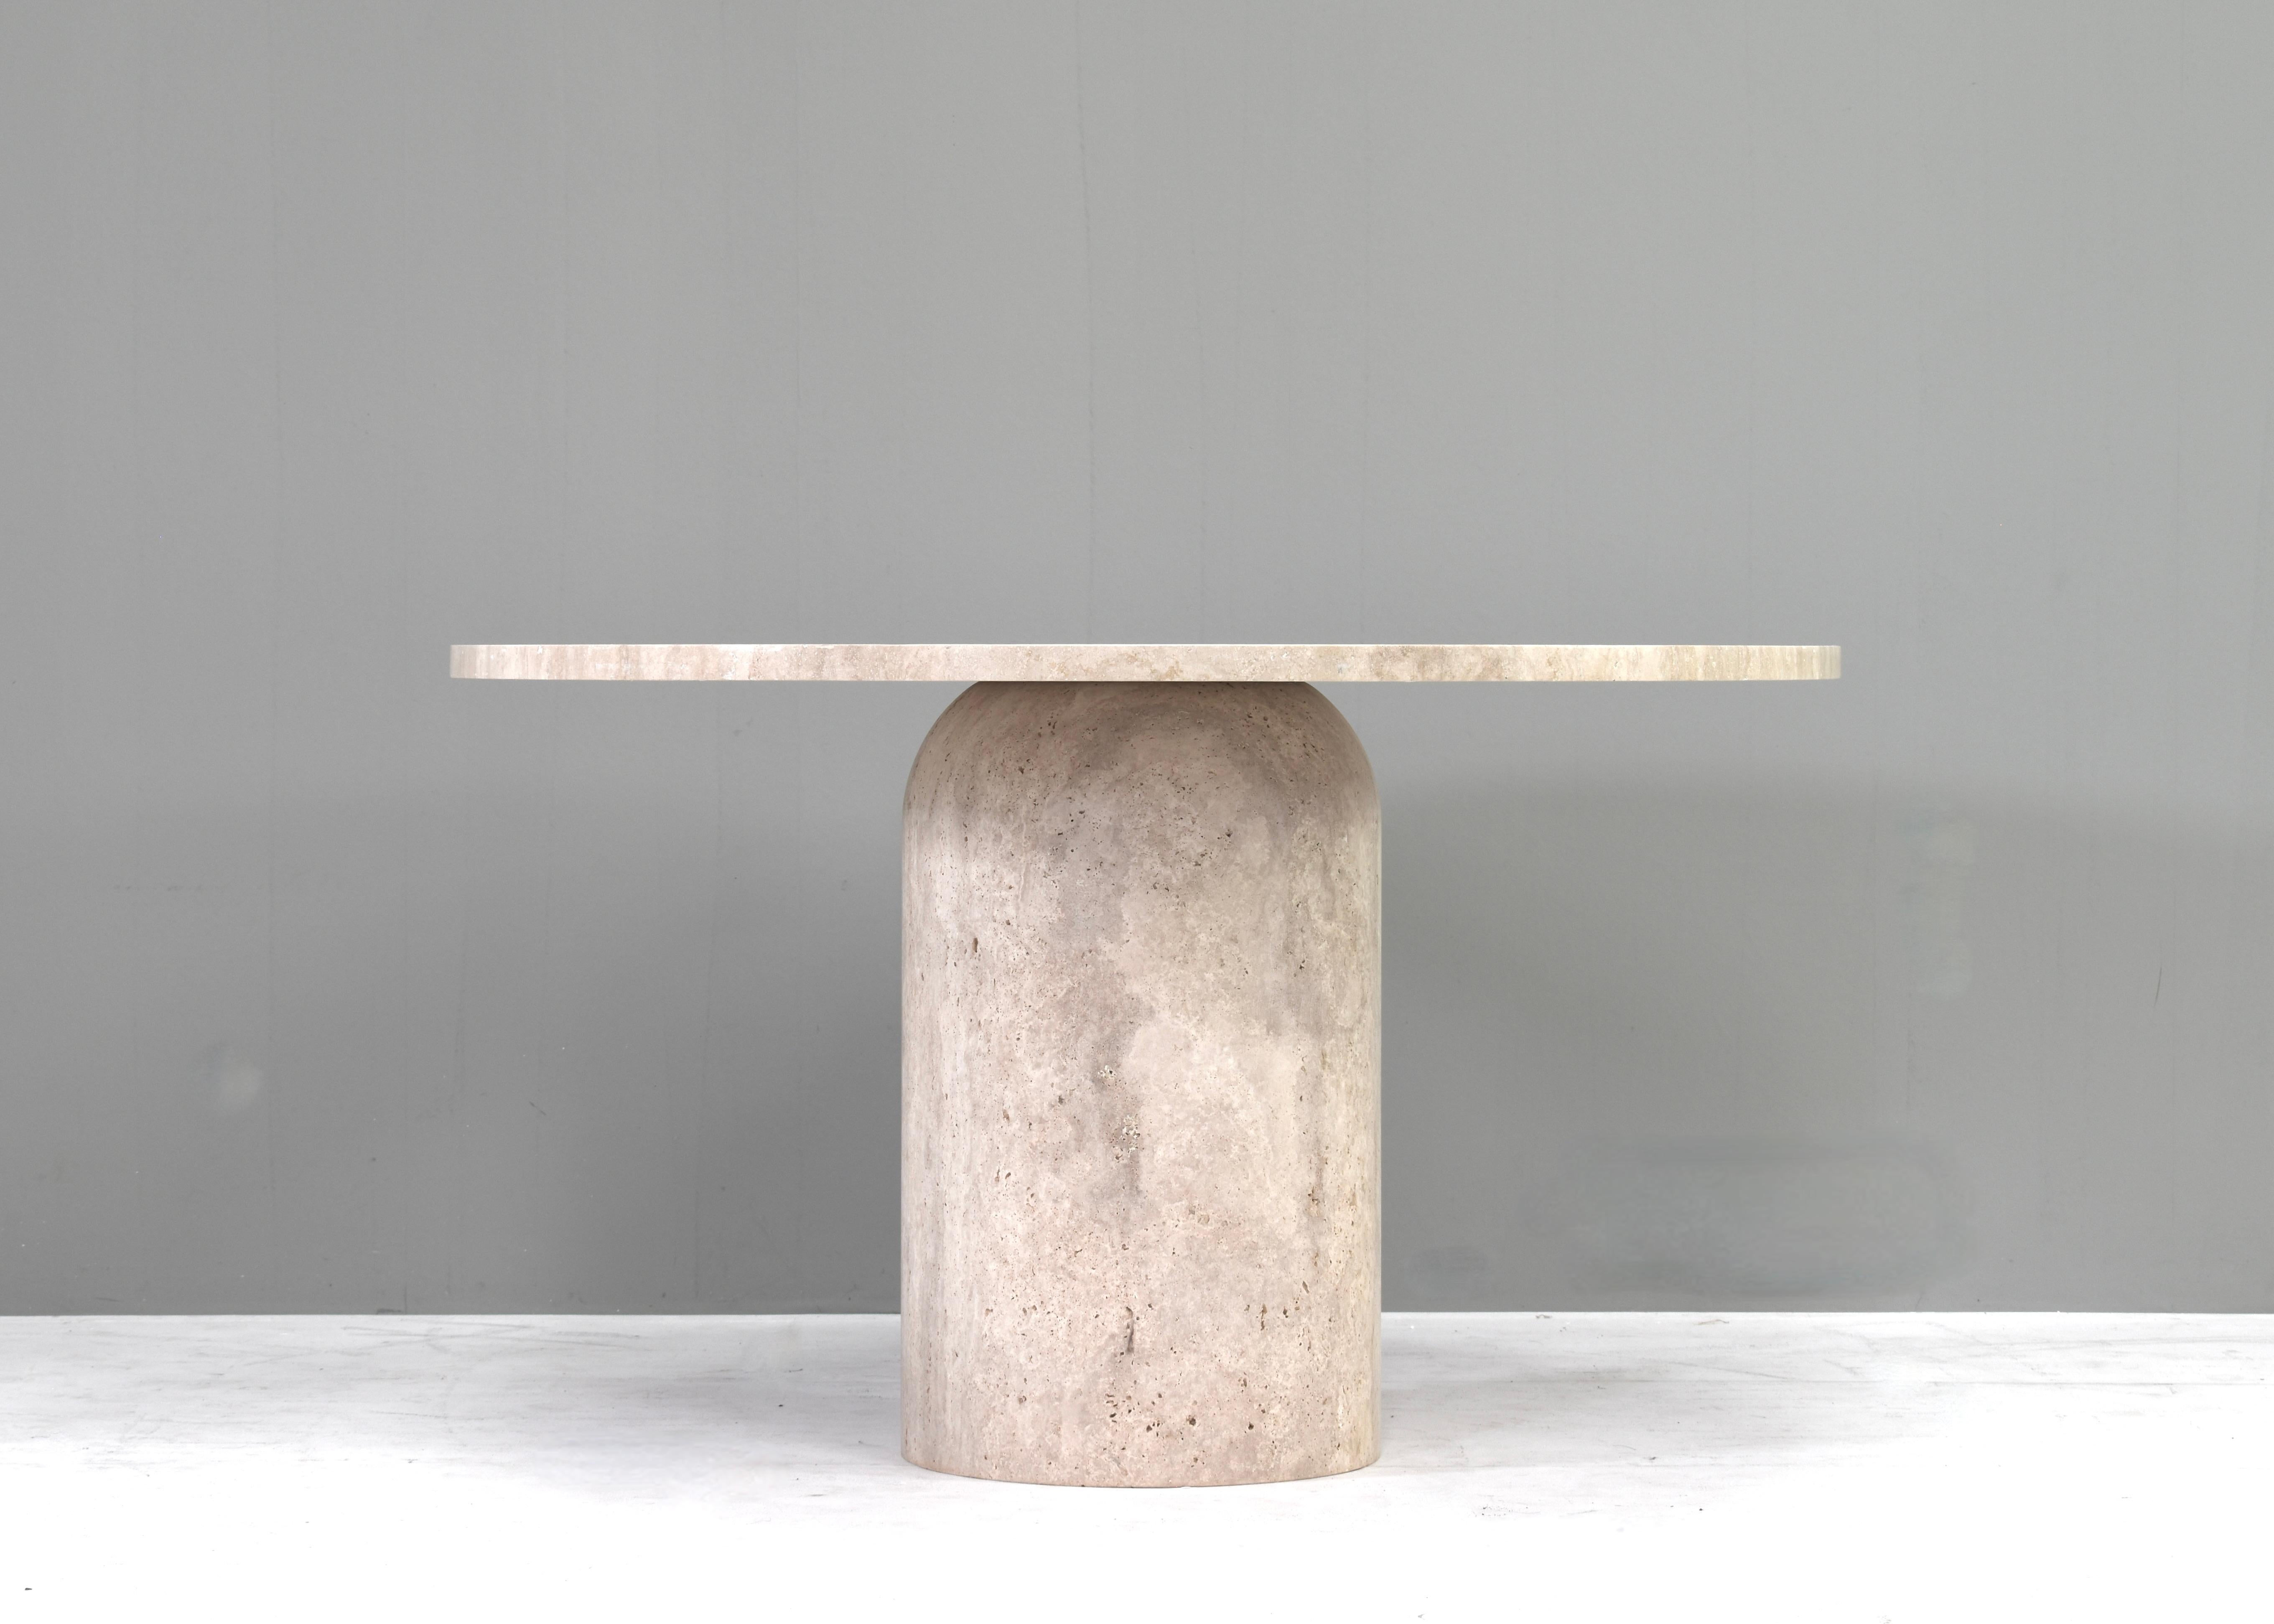 Introducing this exquisite Round Travertine Dining Table – Elegance in the Manor of Up&Up, Angelo Mangiarotti and Kelly Wearstler.

Indulge in the timeless allure of our Round Travertine Dining Table, exquisitely crafted to embody the sophisticated